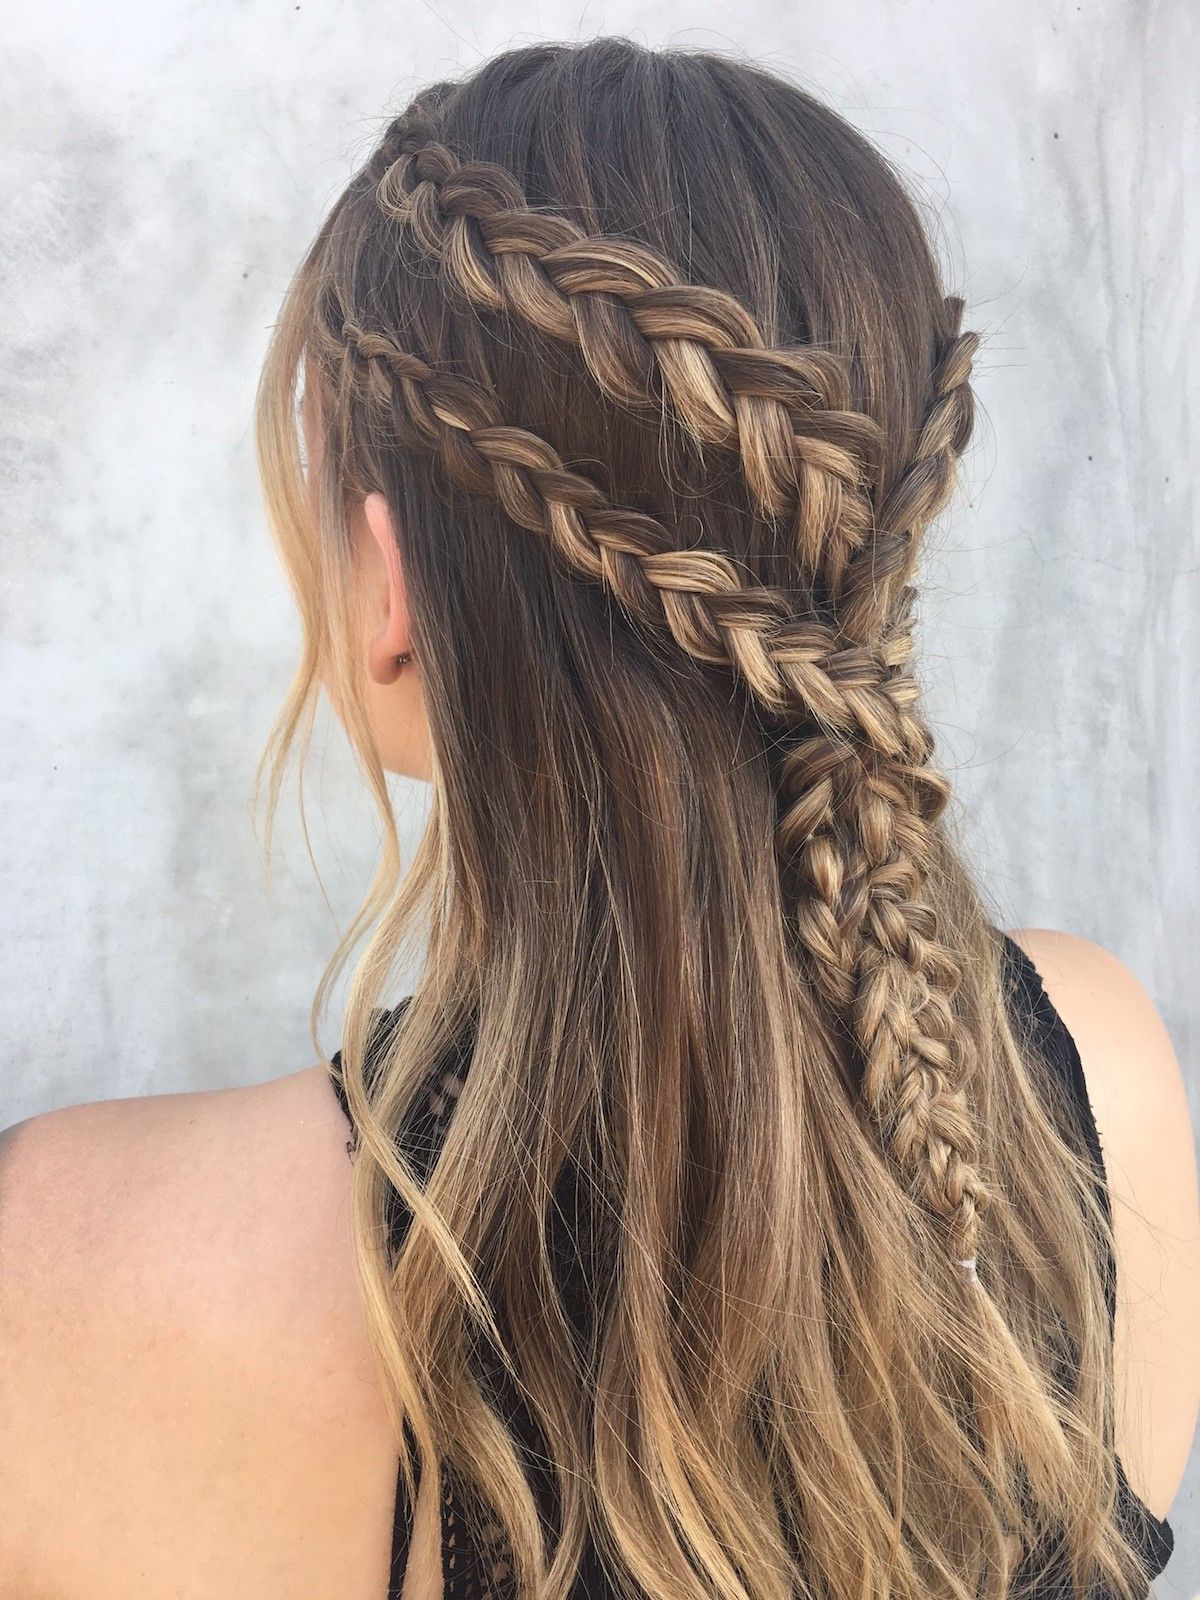 The Most Iconic Game of Thrones Hairstyles | Cosmetify